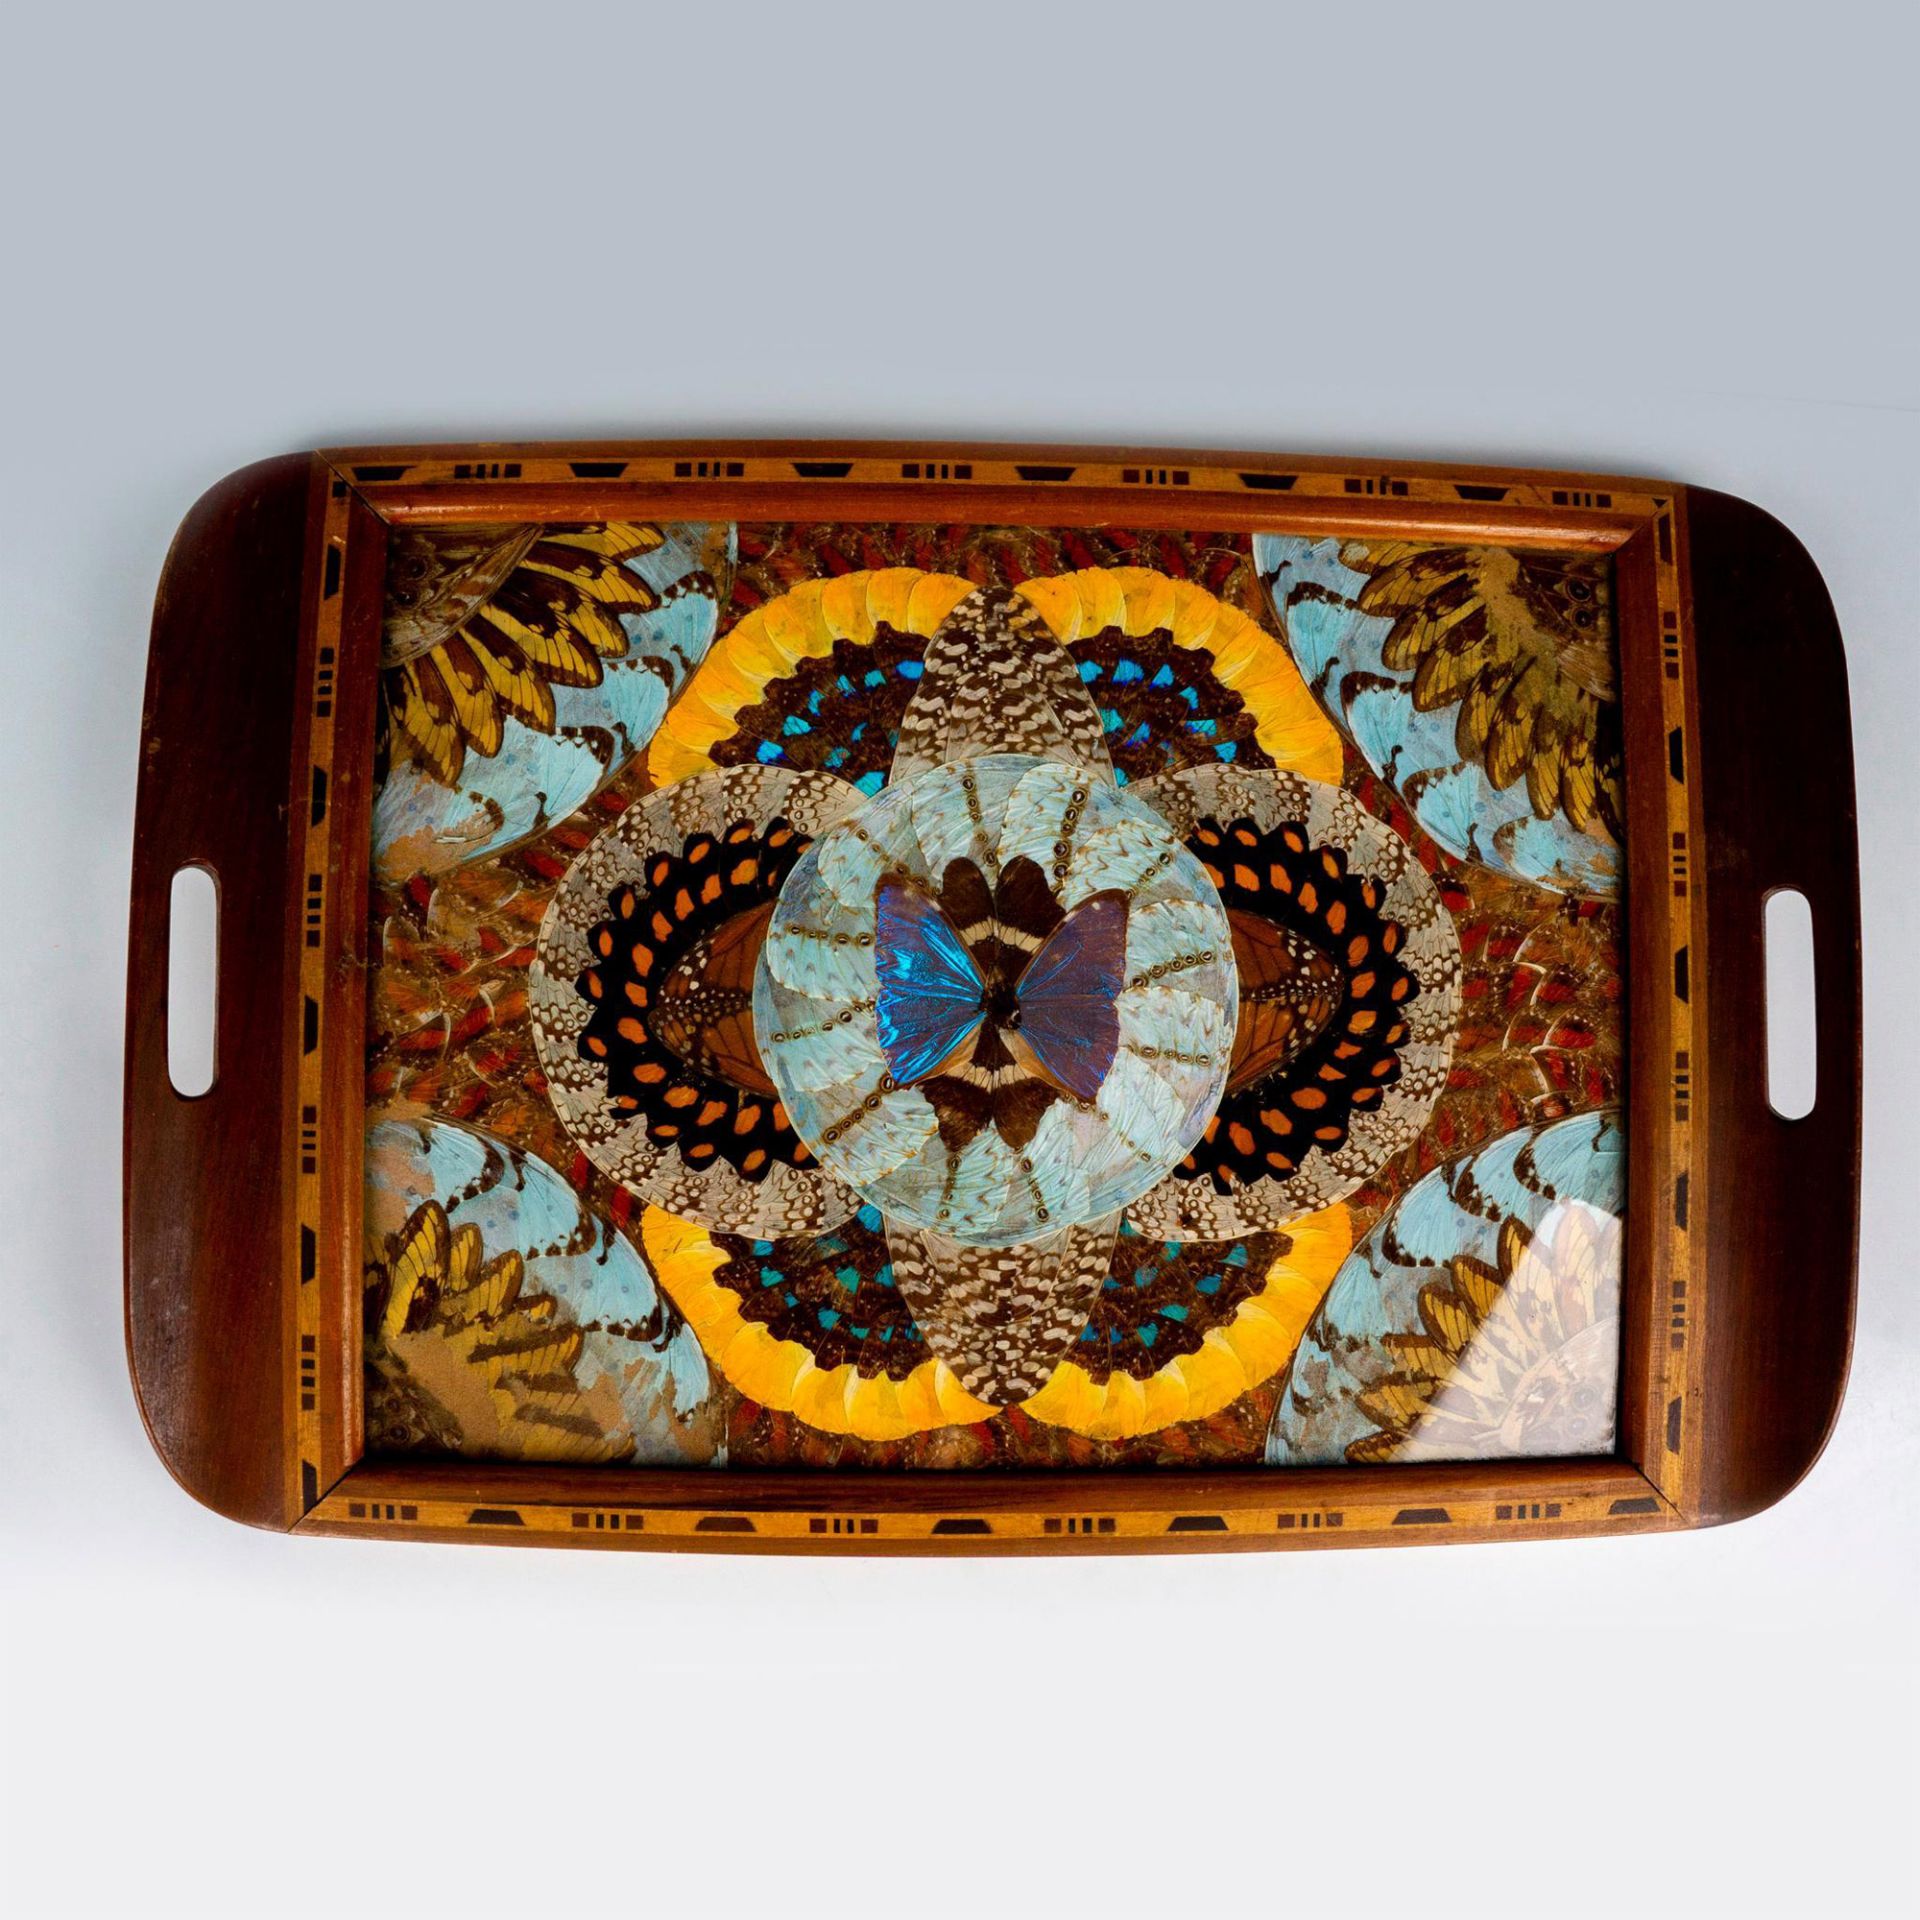 Brazilian Inlaid Tray Blue Morpho Butterfly Wings Design